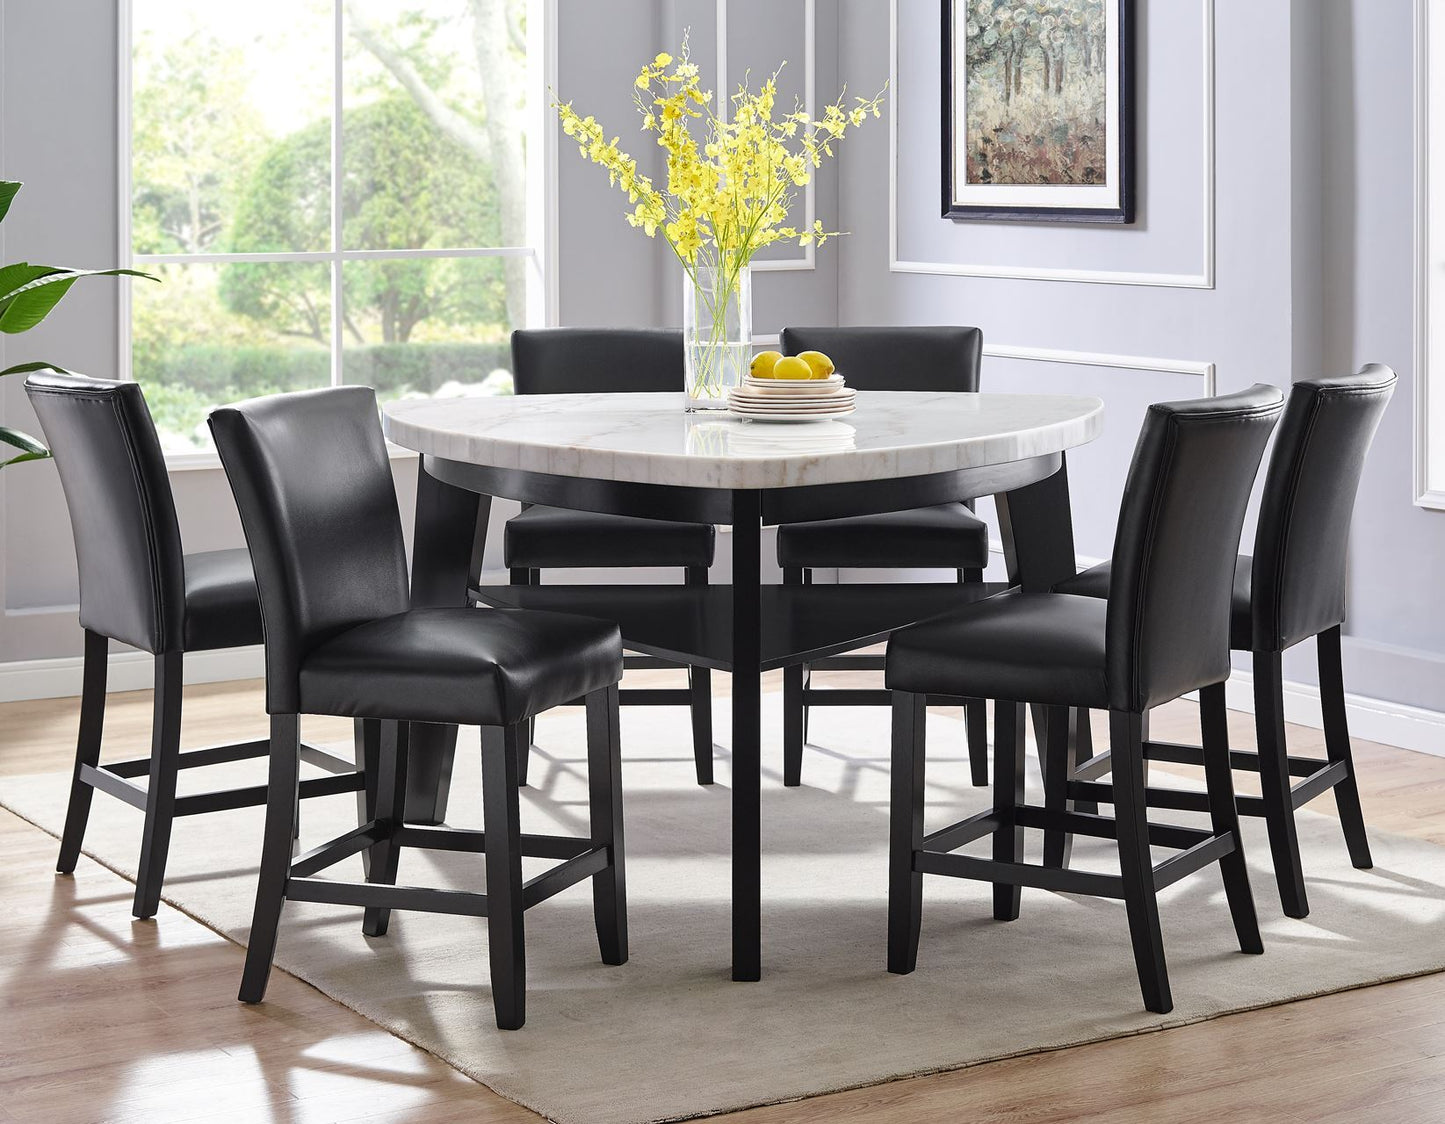 Carrara 6-Piece Marble Counter Dining Set
(Table, Storage Bench & 4 Counter Chairs)